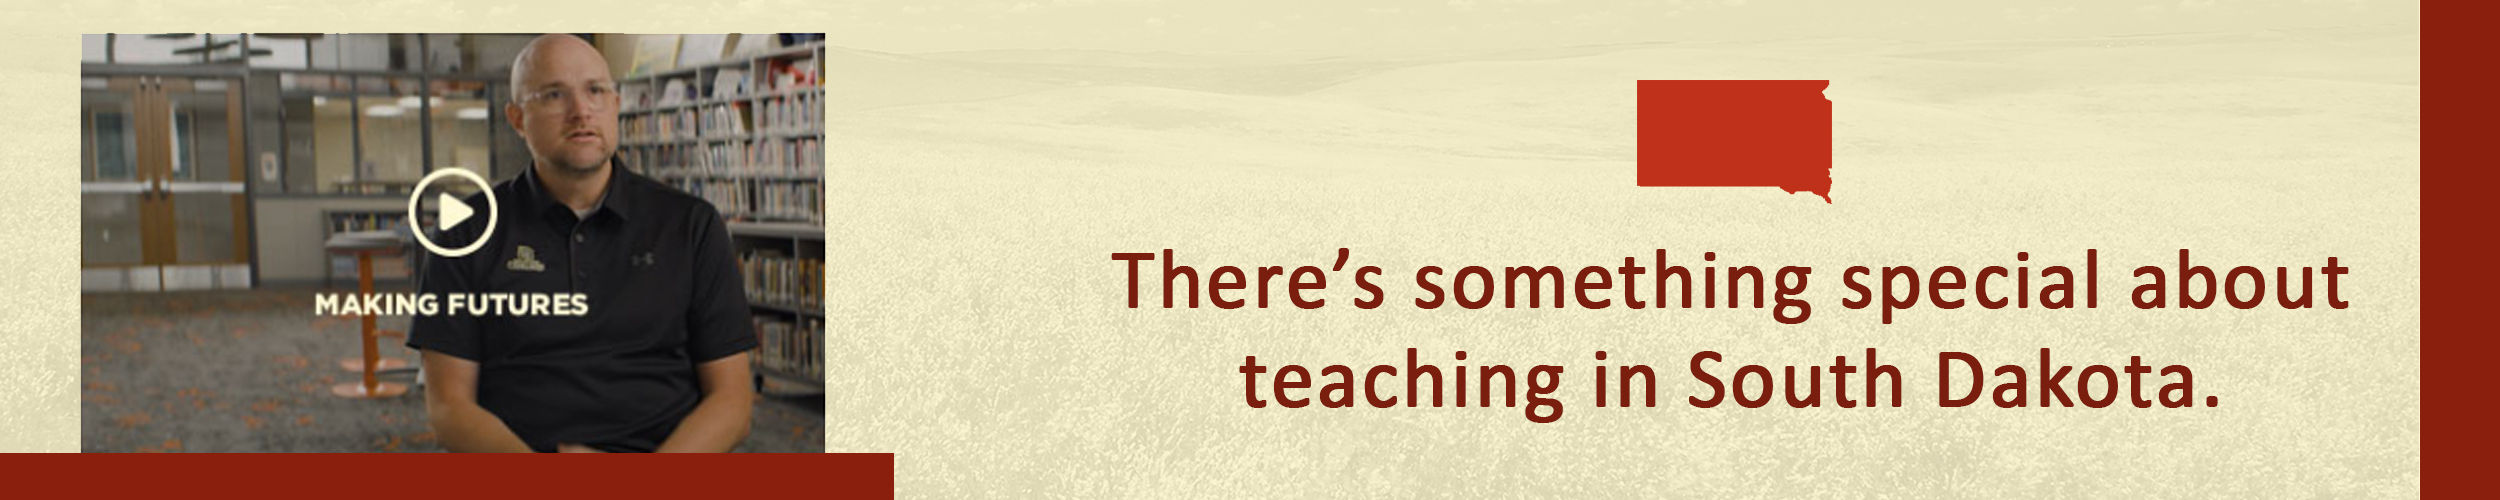 There is something special about teaching in South Dakota. Link.